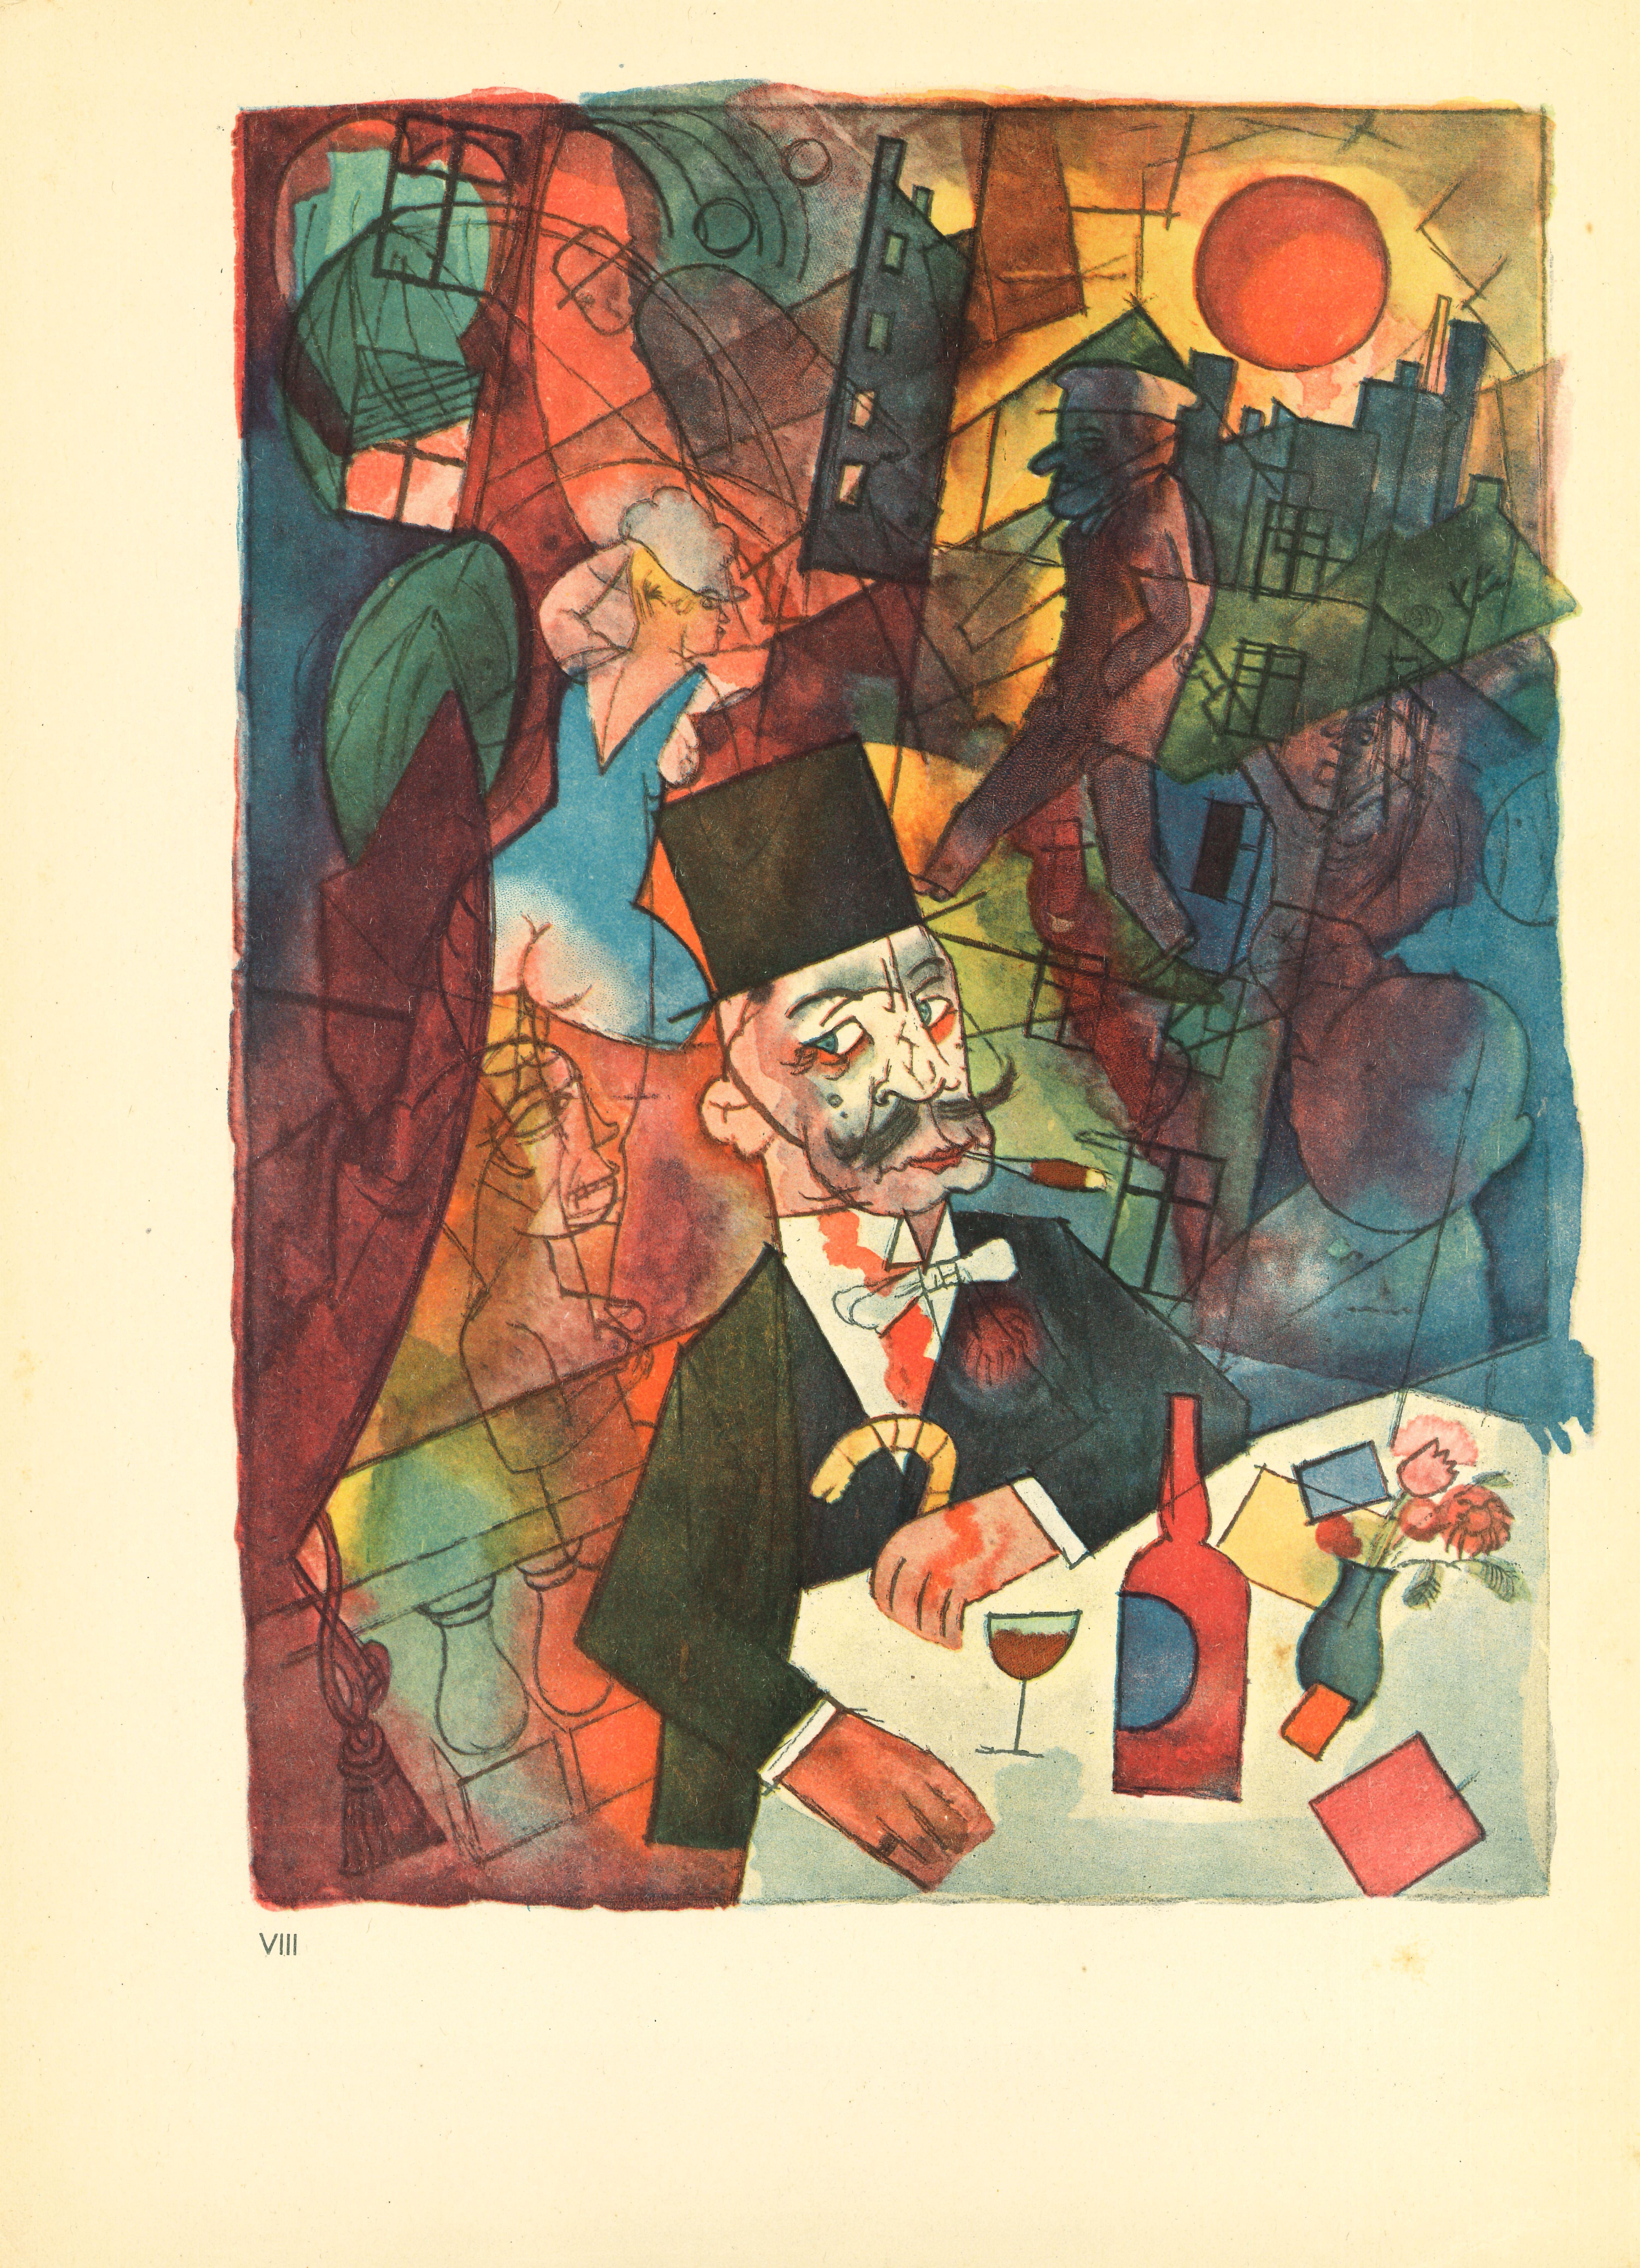 The white Slaver is an original seven-color offset and lithograph, realized by George Grosz.

The artwork is the plate n. VIII from the porfolio Ecce Homo published between 1922/1923,edition of Der Malik-Verlag Berli, that includes offset lithograph